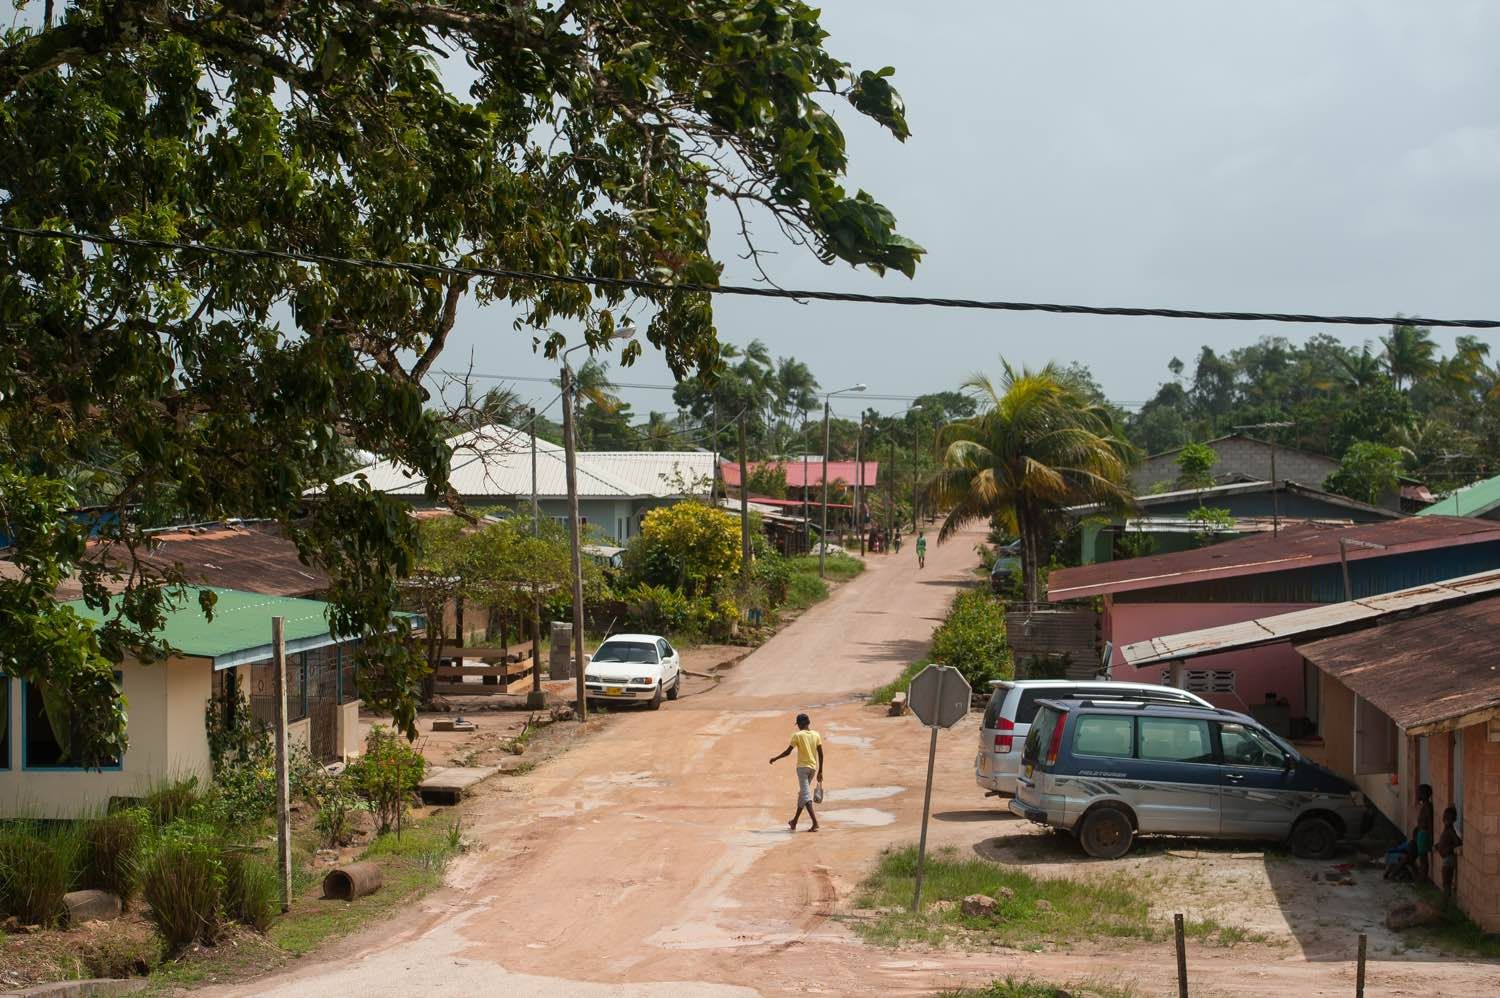 A man walks through a neighborhood in Moengo, Suriname, built by Alcoa's subsidiary for its employees. Image by Stephanie Strasburg. Suriname, 2017.
